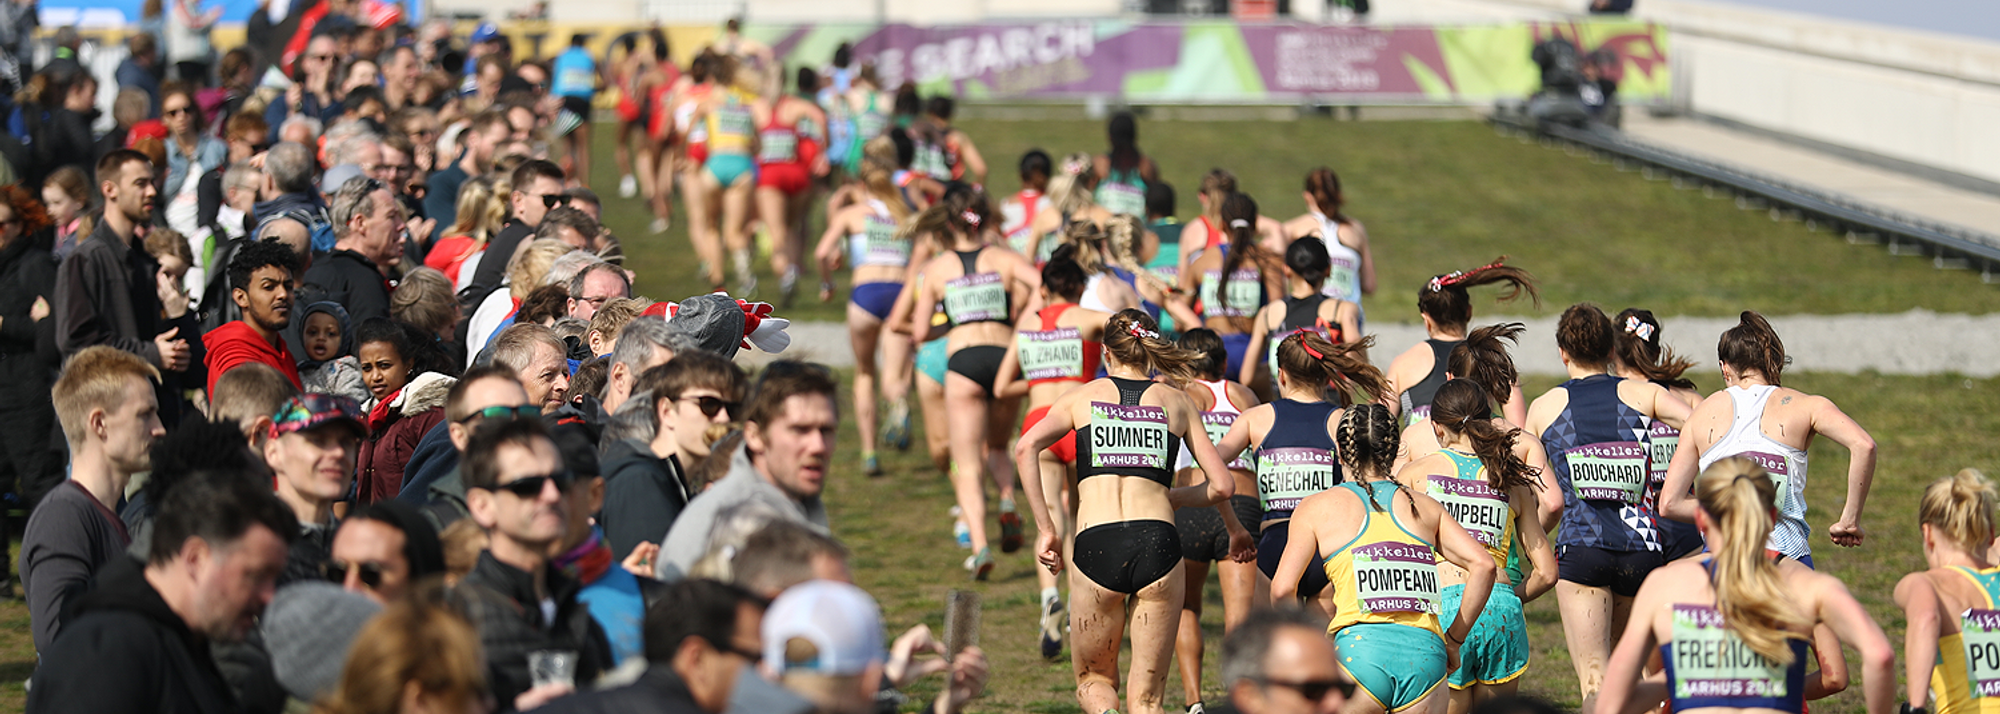 As the Australian city of Bathurst prepares to host the 2021 edition, an economic and social impact study has demonstrated the huge benefits of the Danish city of Aarhus hosting the 2019 IAAF World Cross Country Championships.